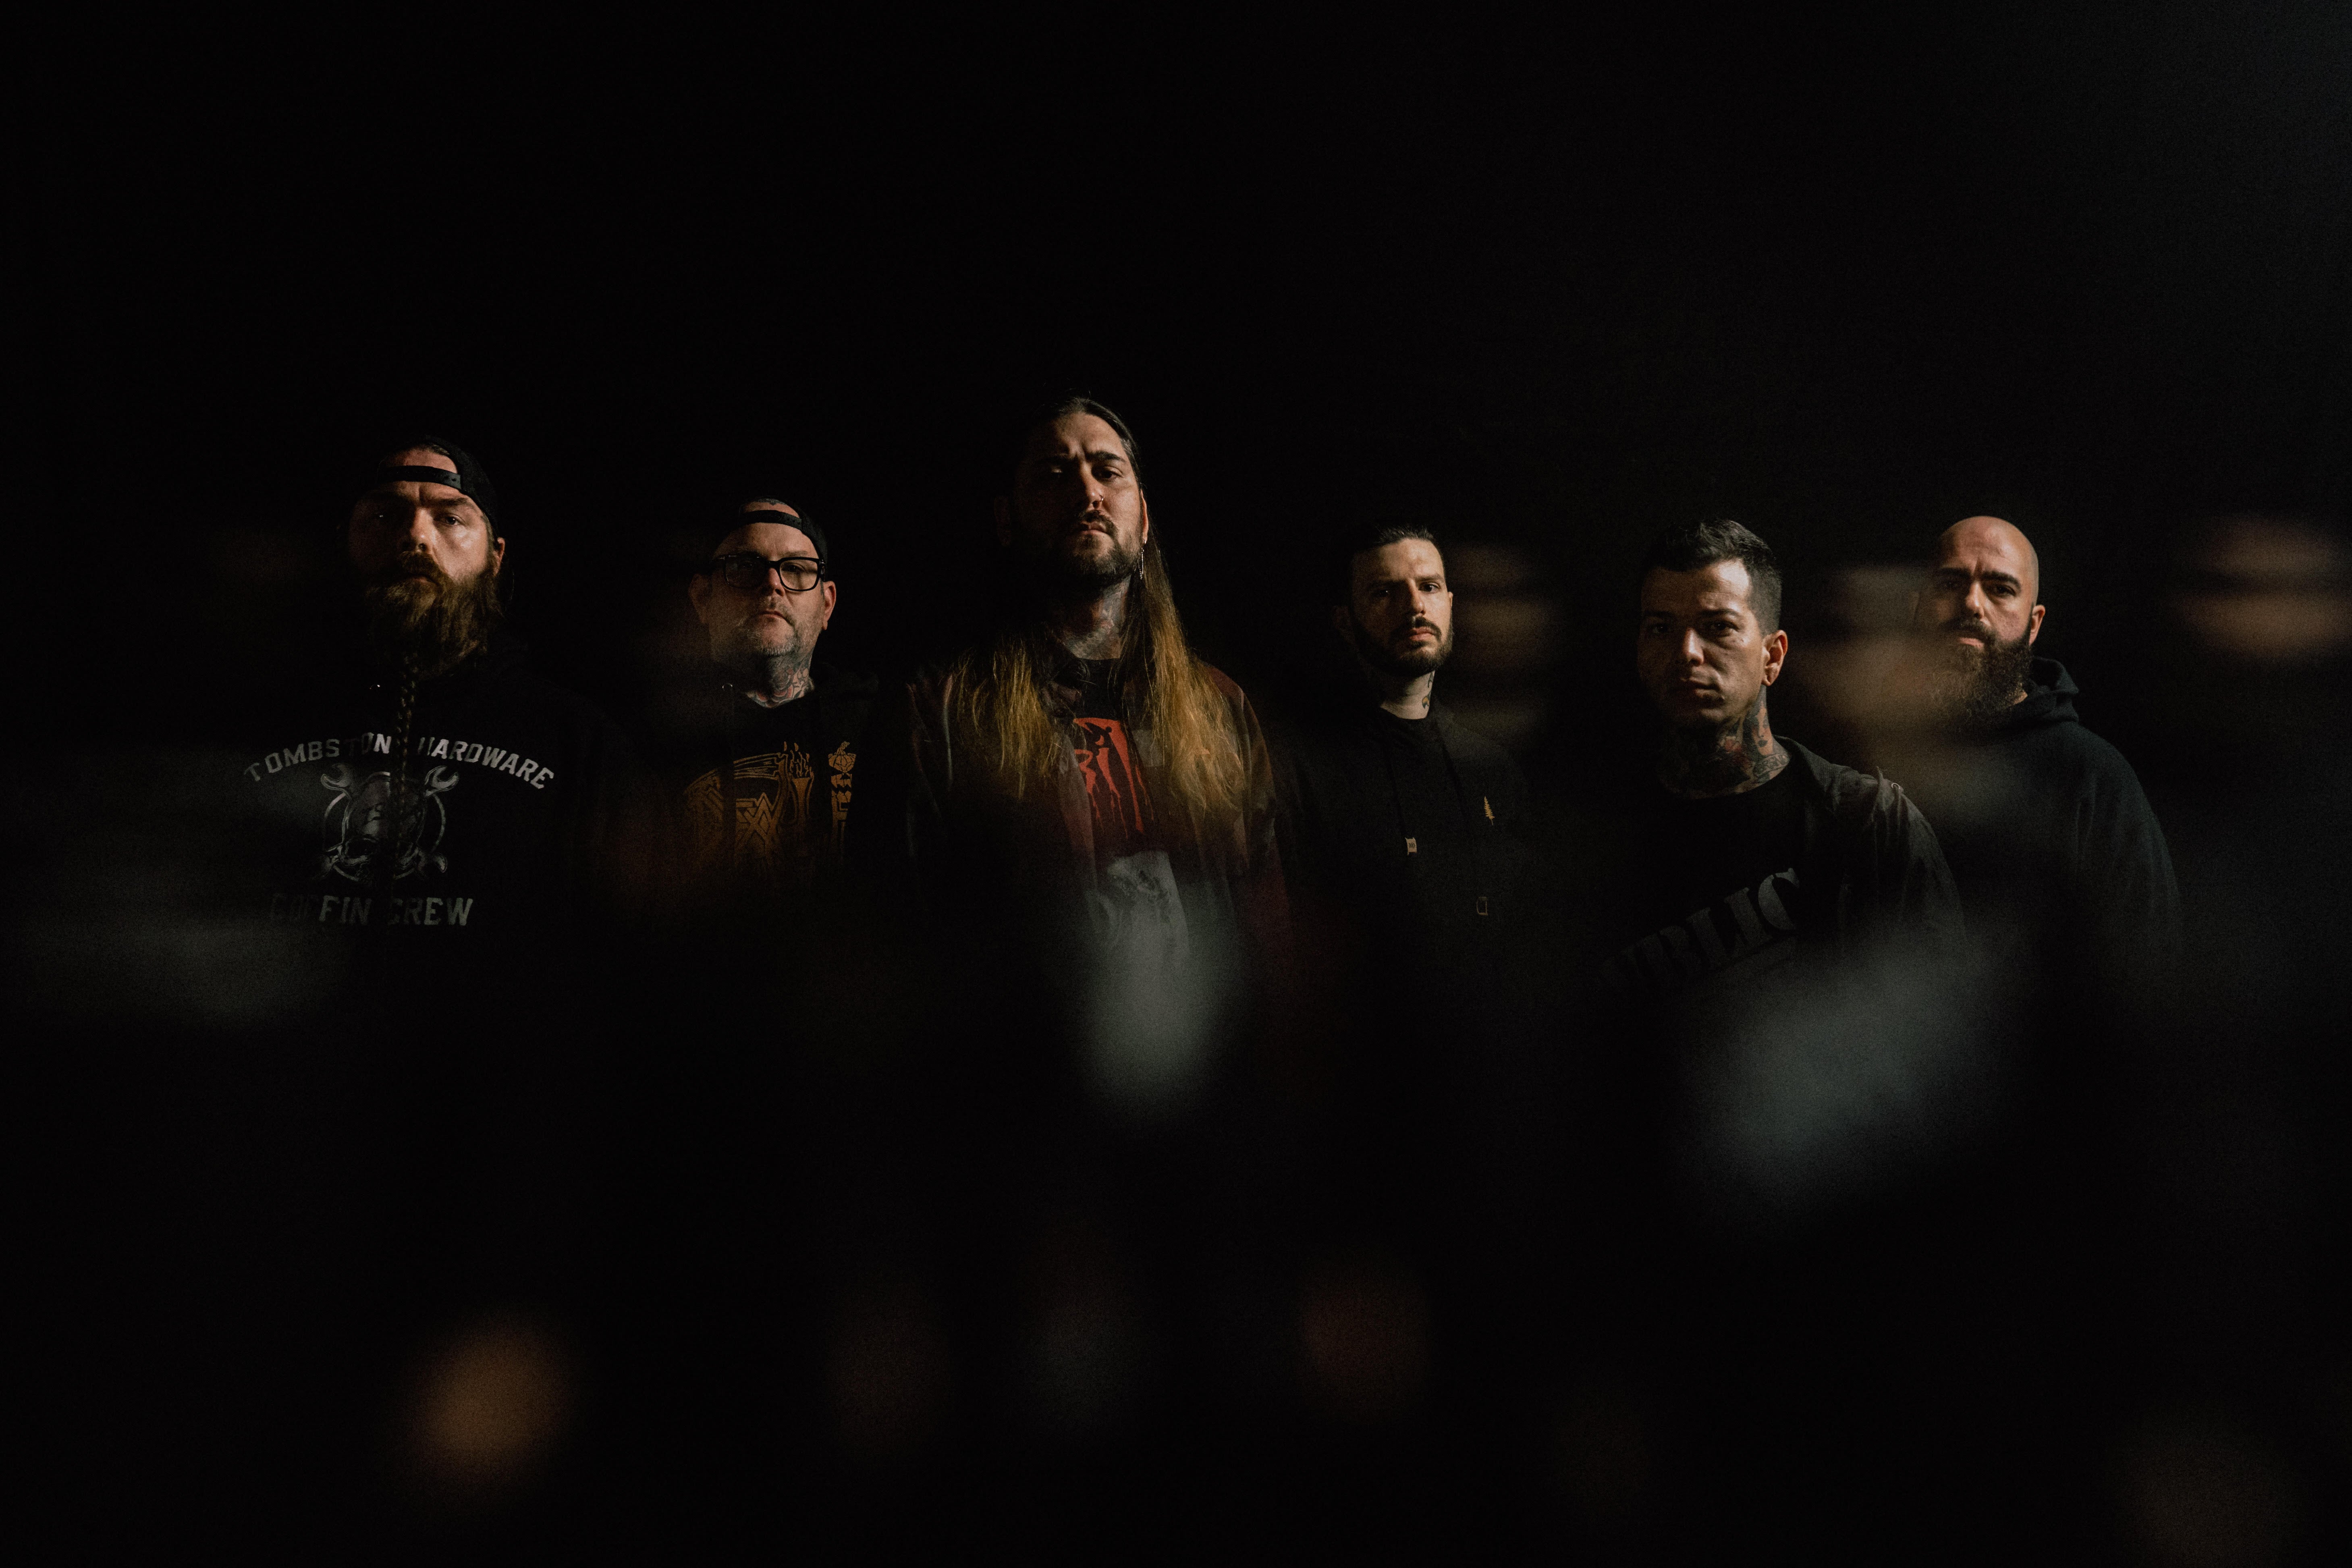 Fit for an Autopsy & Sylosis in London promo photo for Live Nation presale offer code